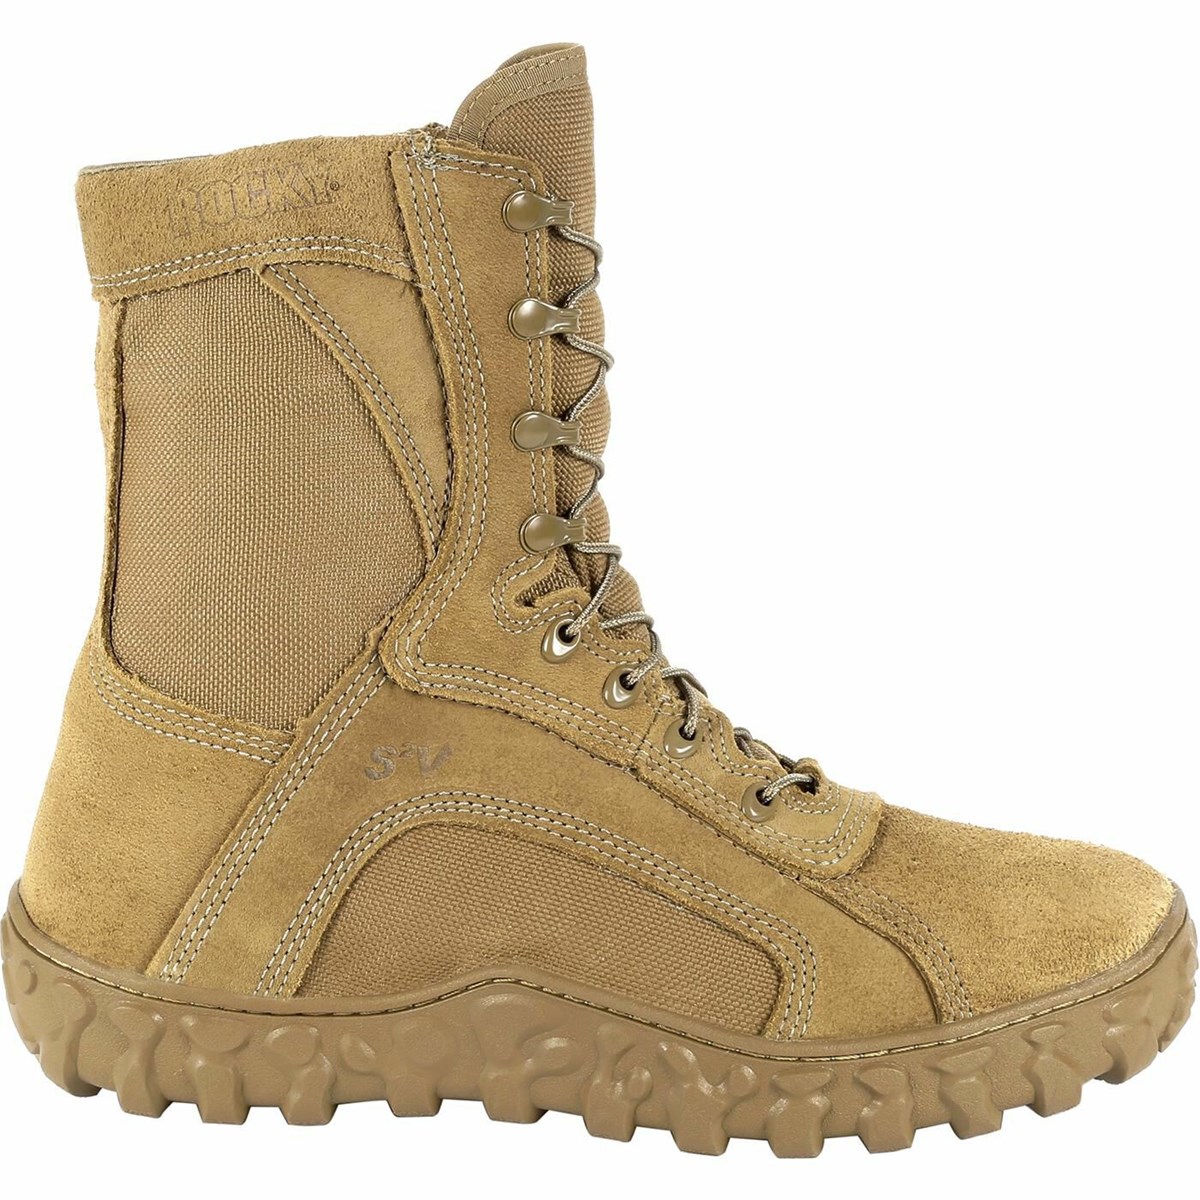 Buy Rocky Military Boots Cheap - Brown Mens S2V Waterproof 400G 